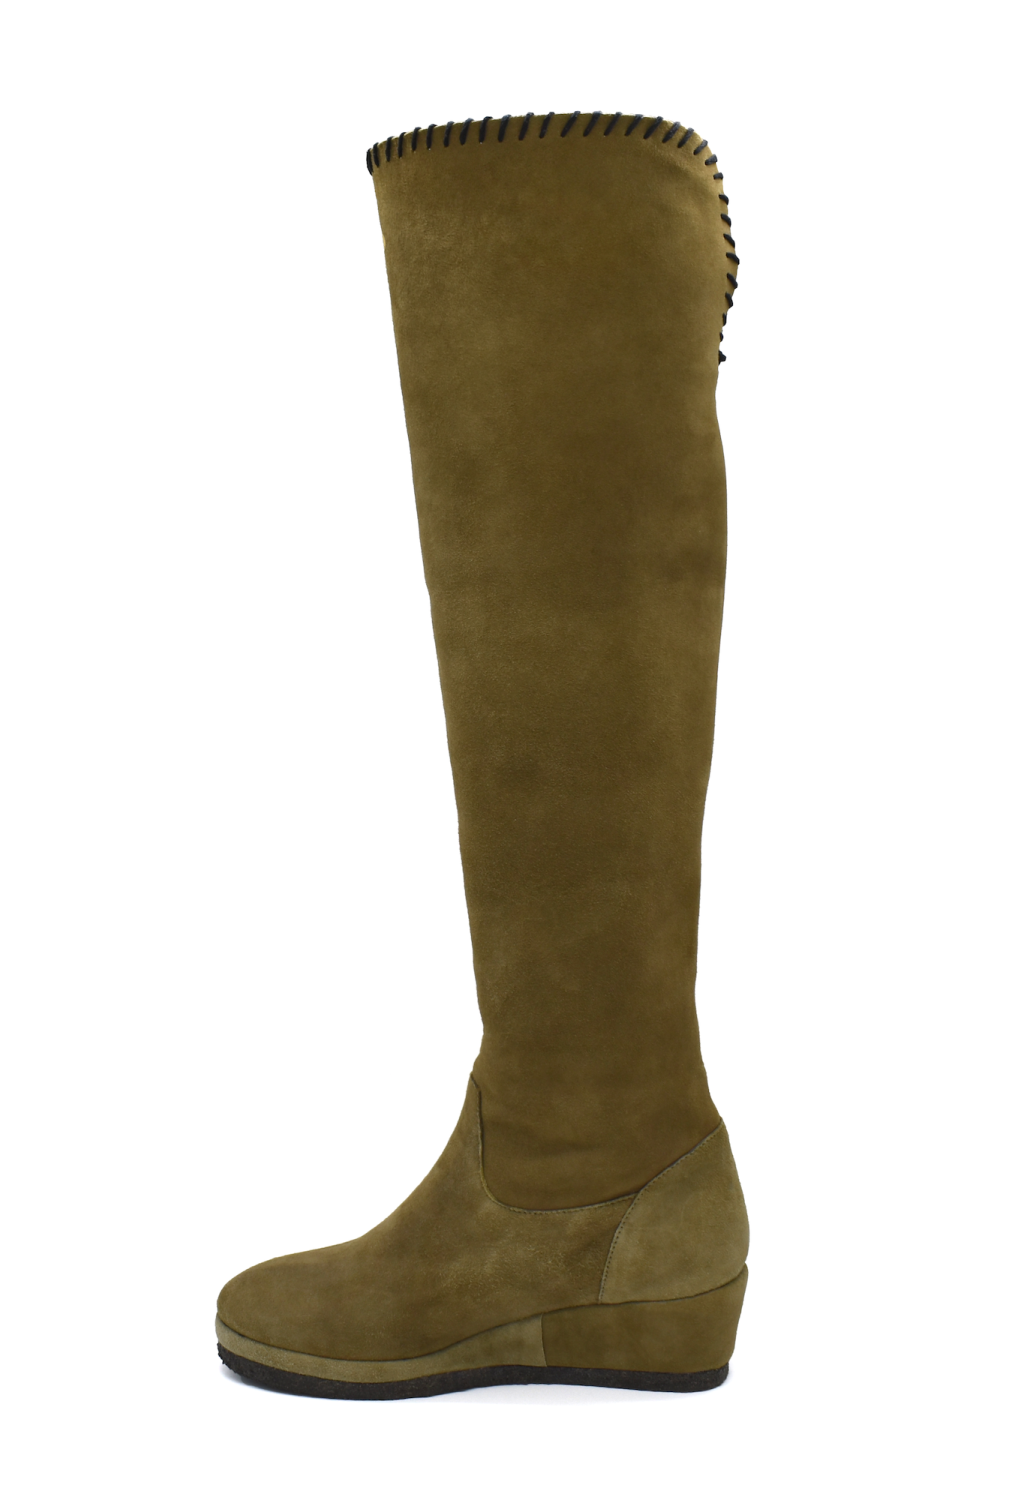 Wedge Over The Knee Boots